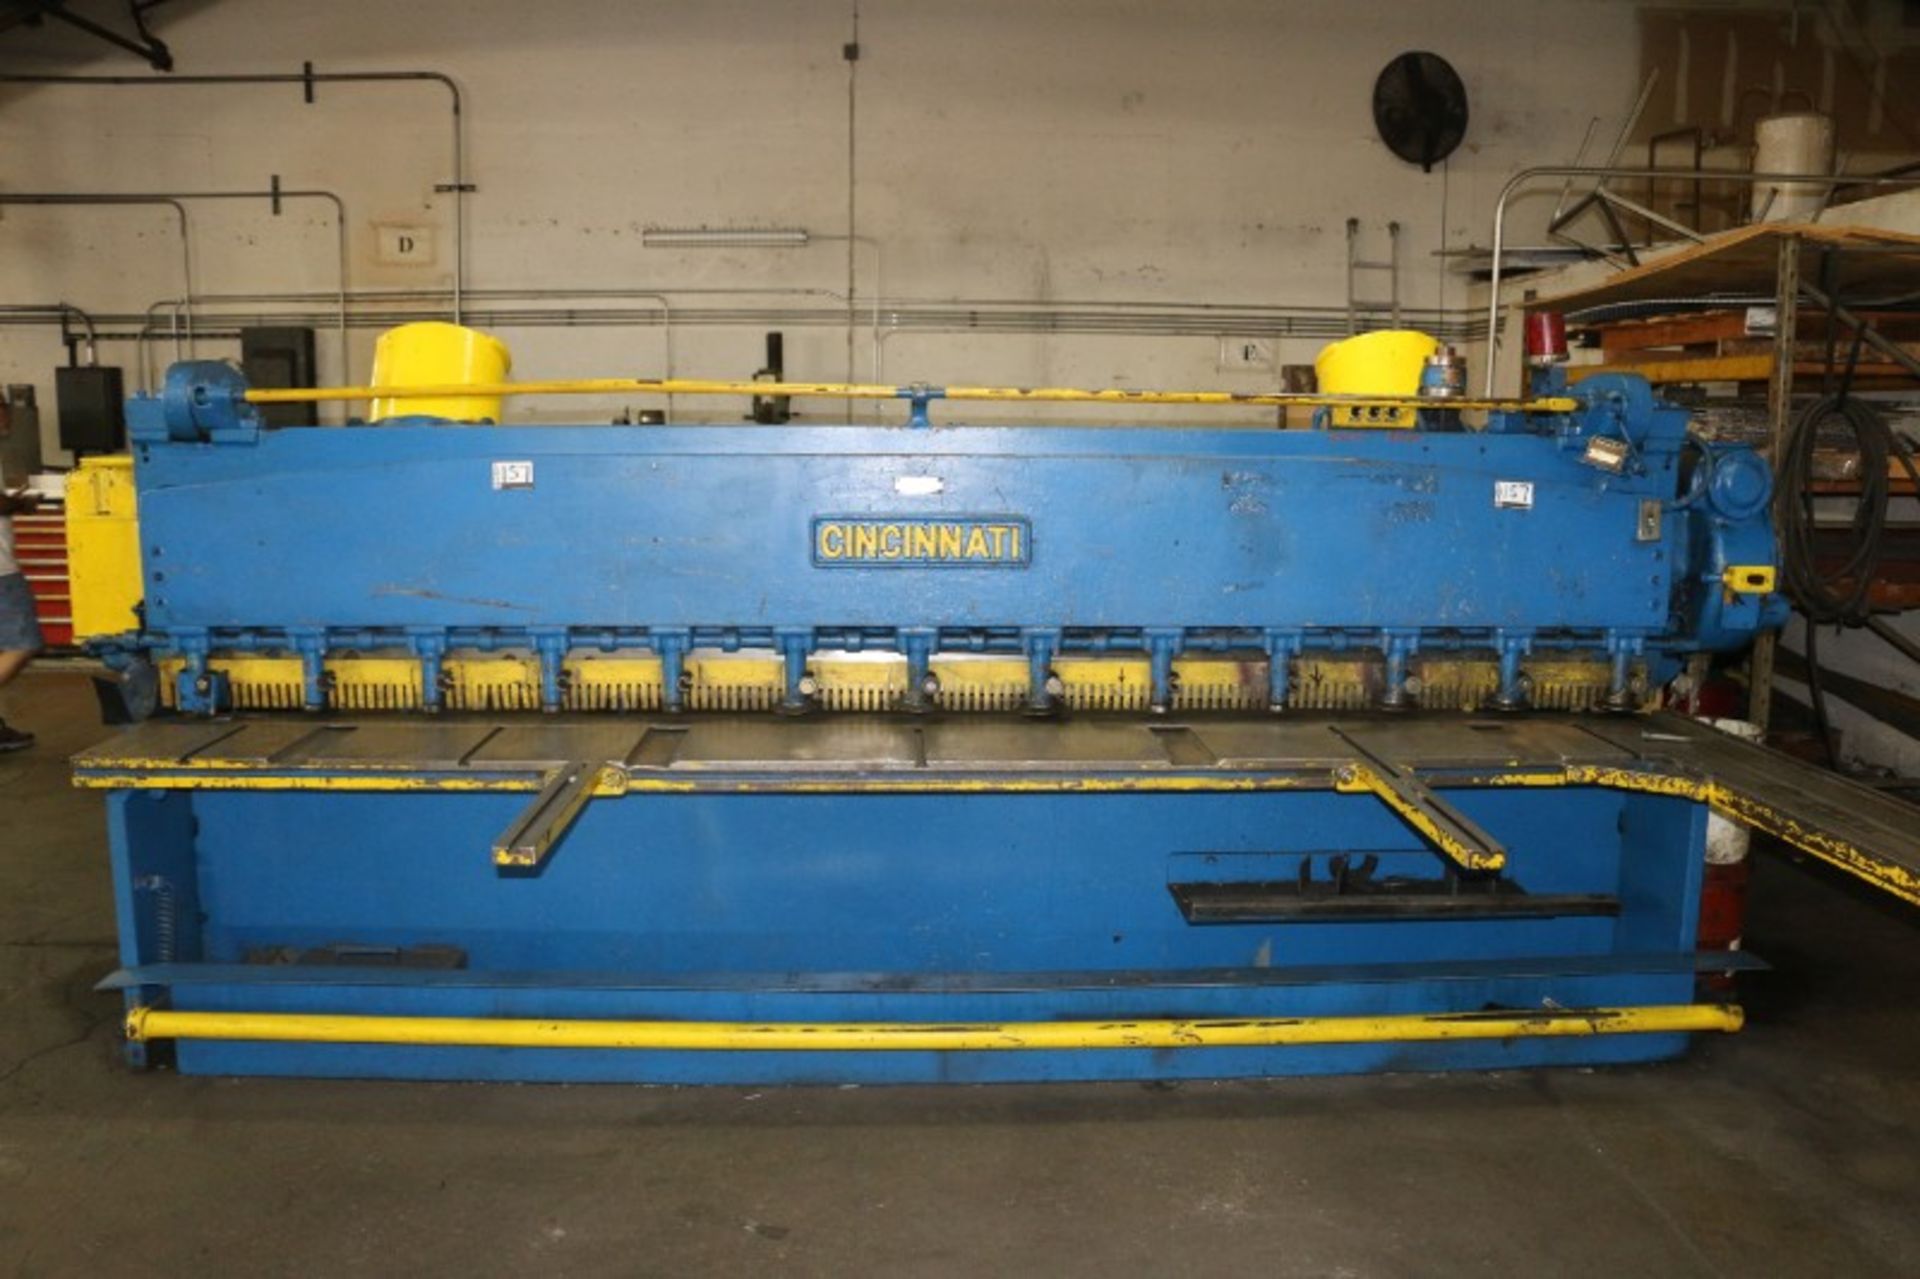 Cincinnati Model 1412 Mechanical Shear Equipped with Squaring Arm, Support Arms, S/N 13299 - Image 5 of 9